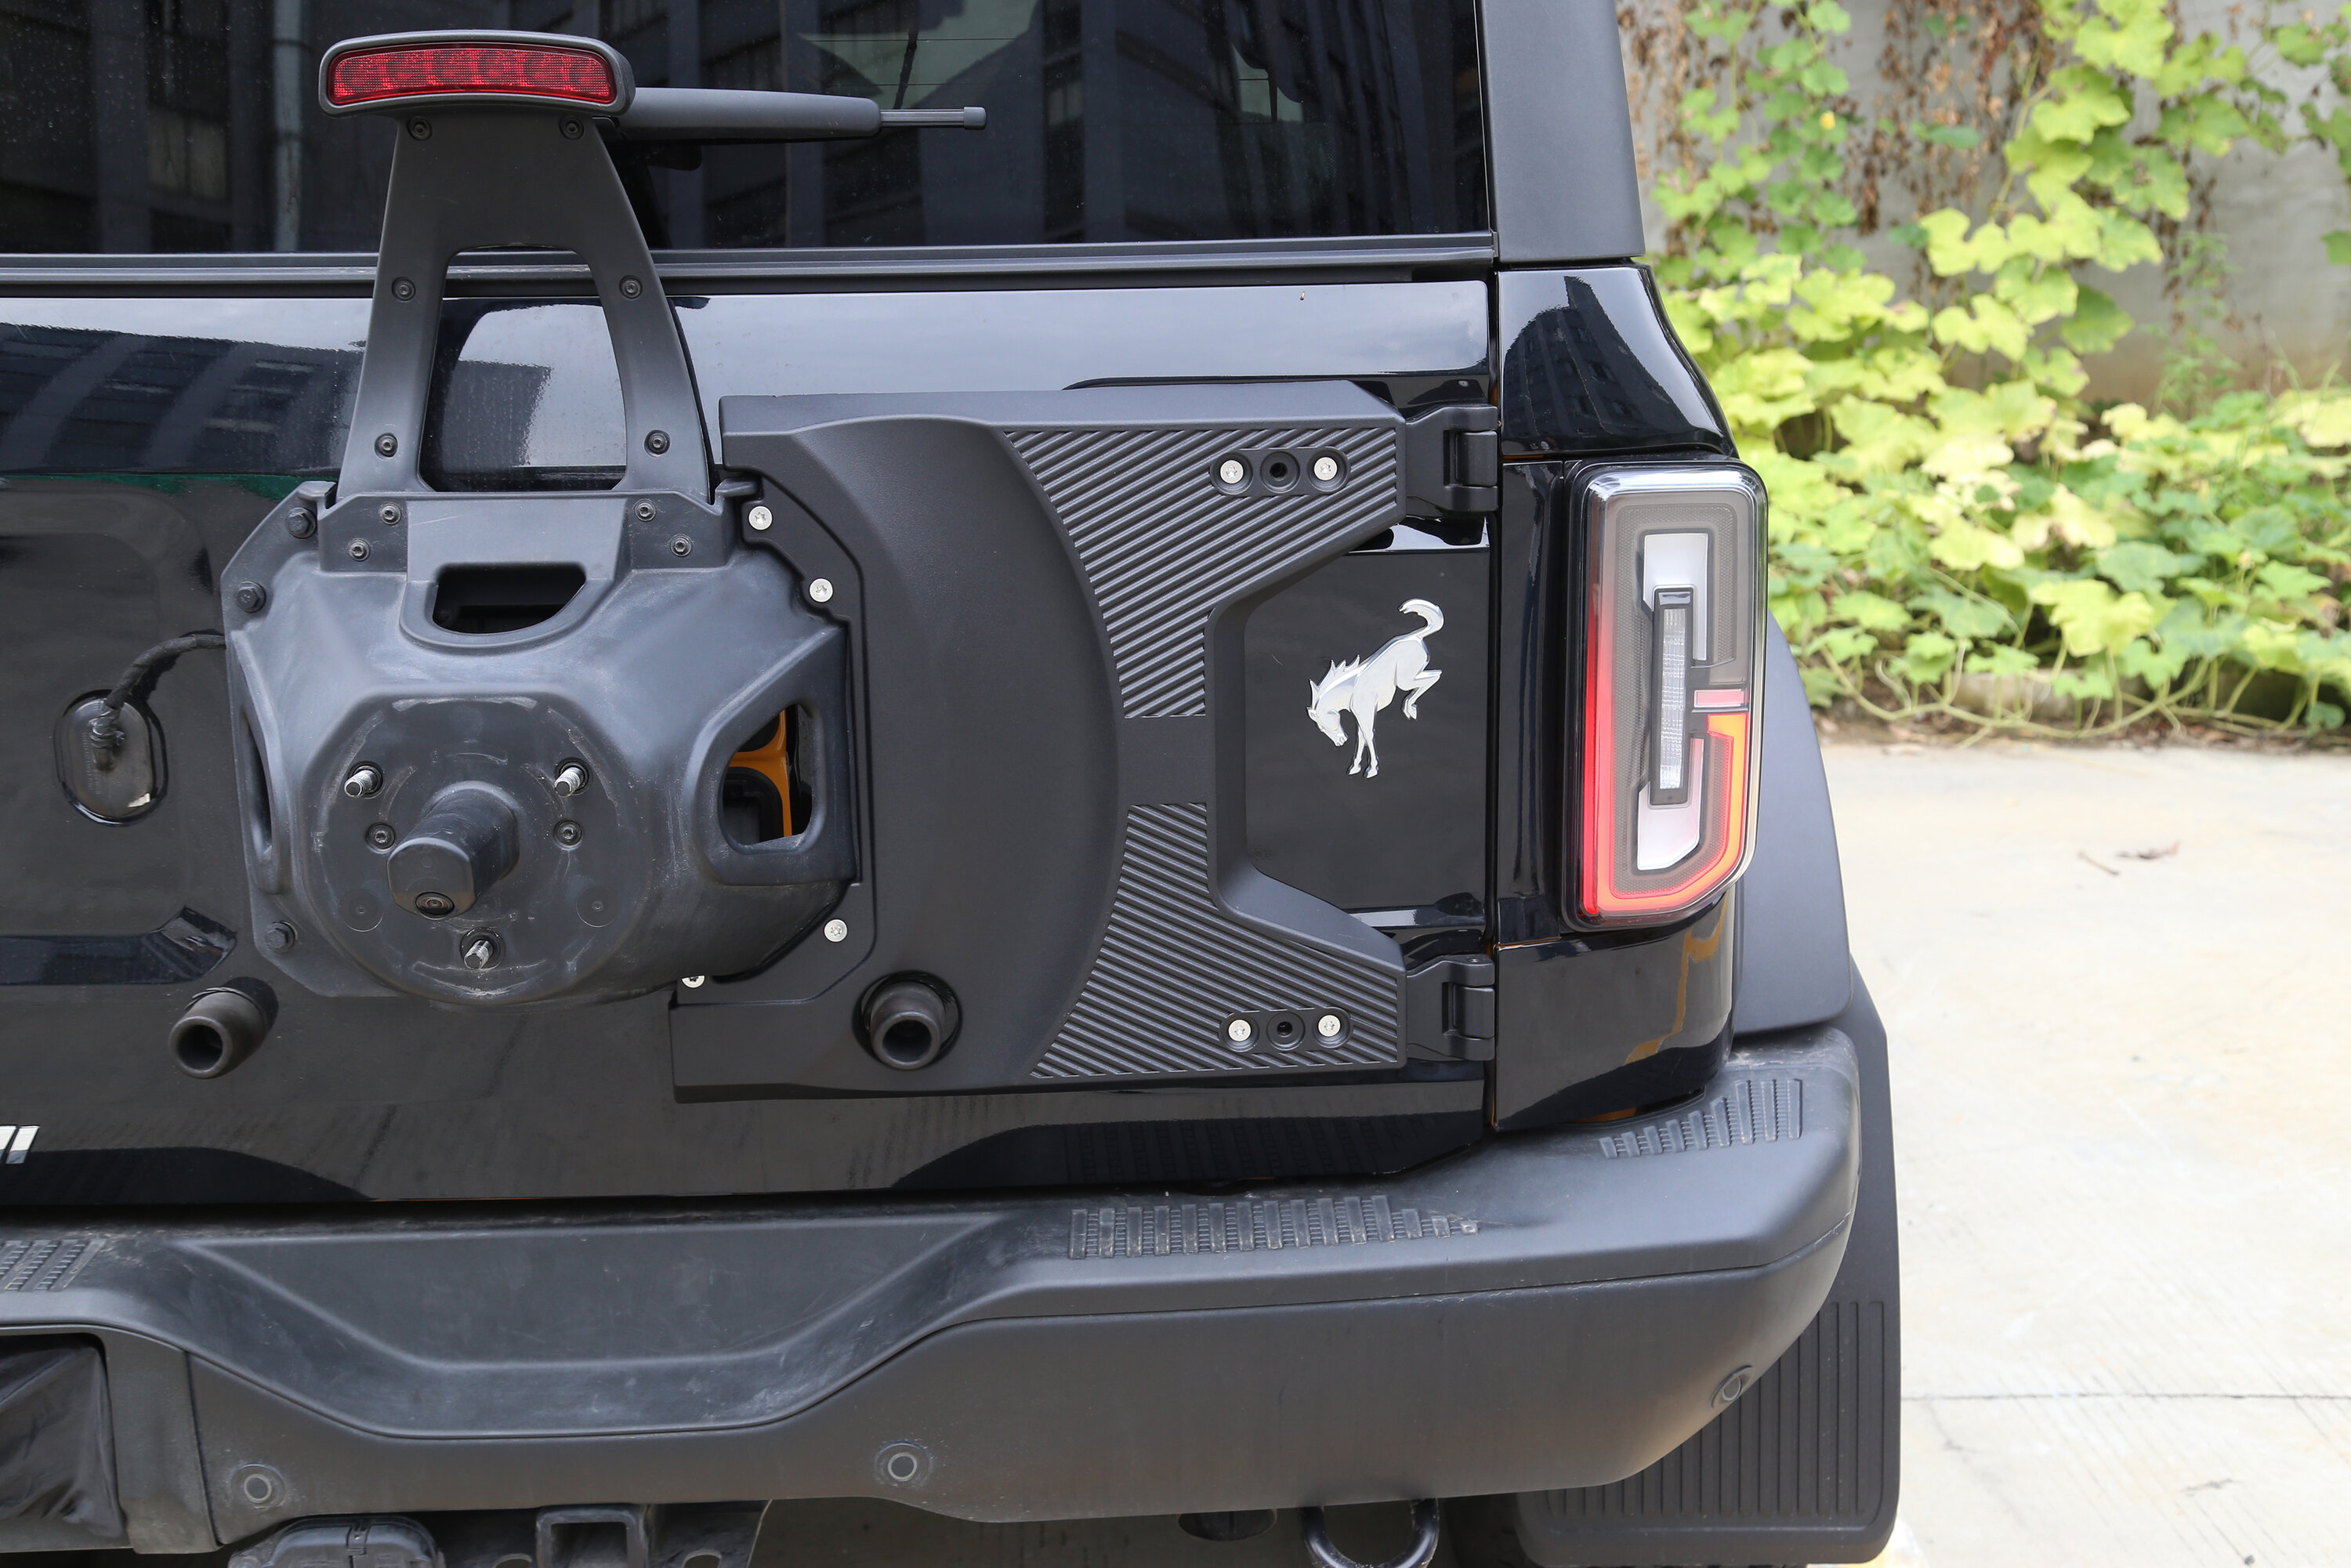 Ford Bronco Mabett Raptor Style Tailgate Hinge Reinforcement Kit for Ford Bronco Available Now! 1700643772127